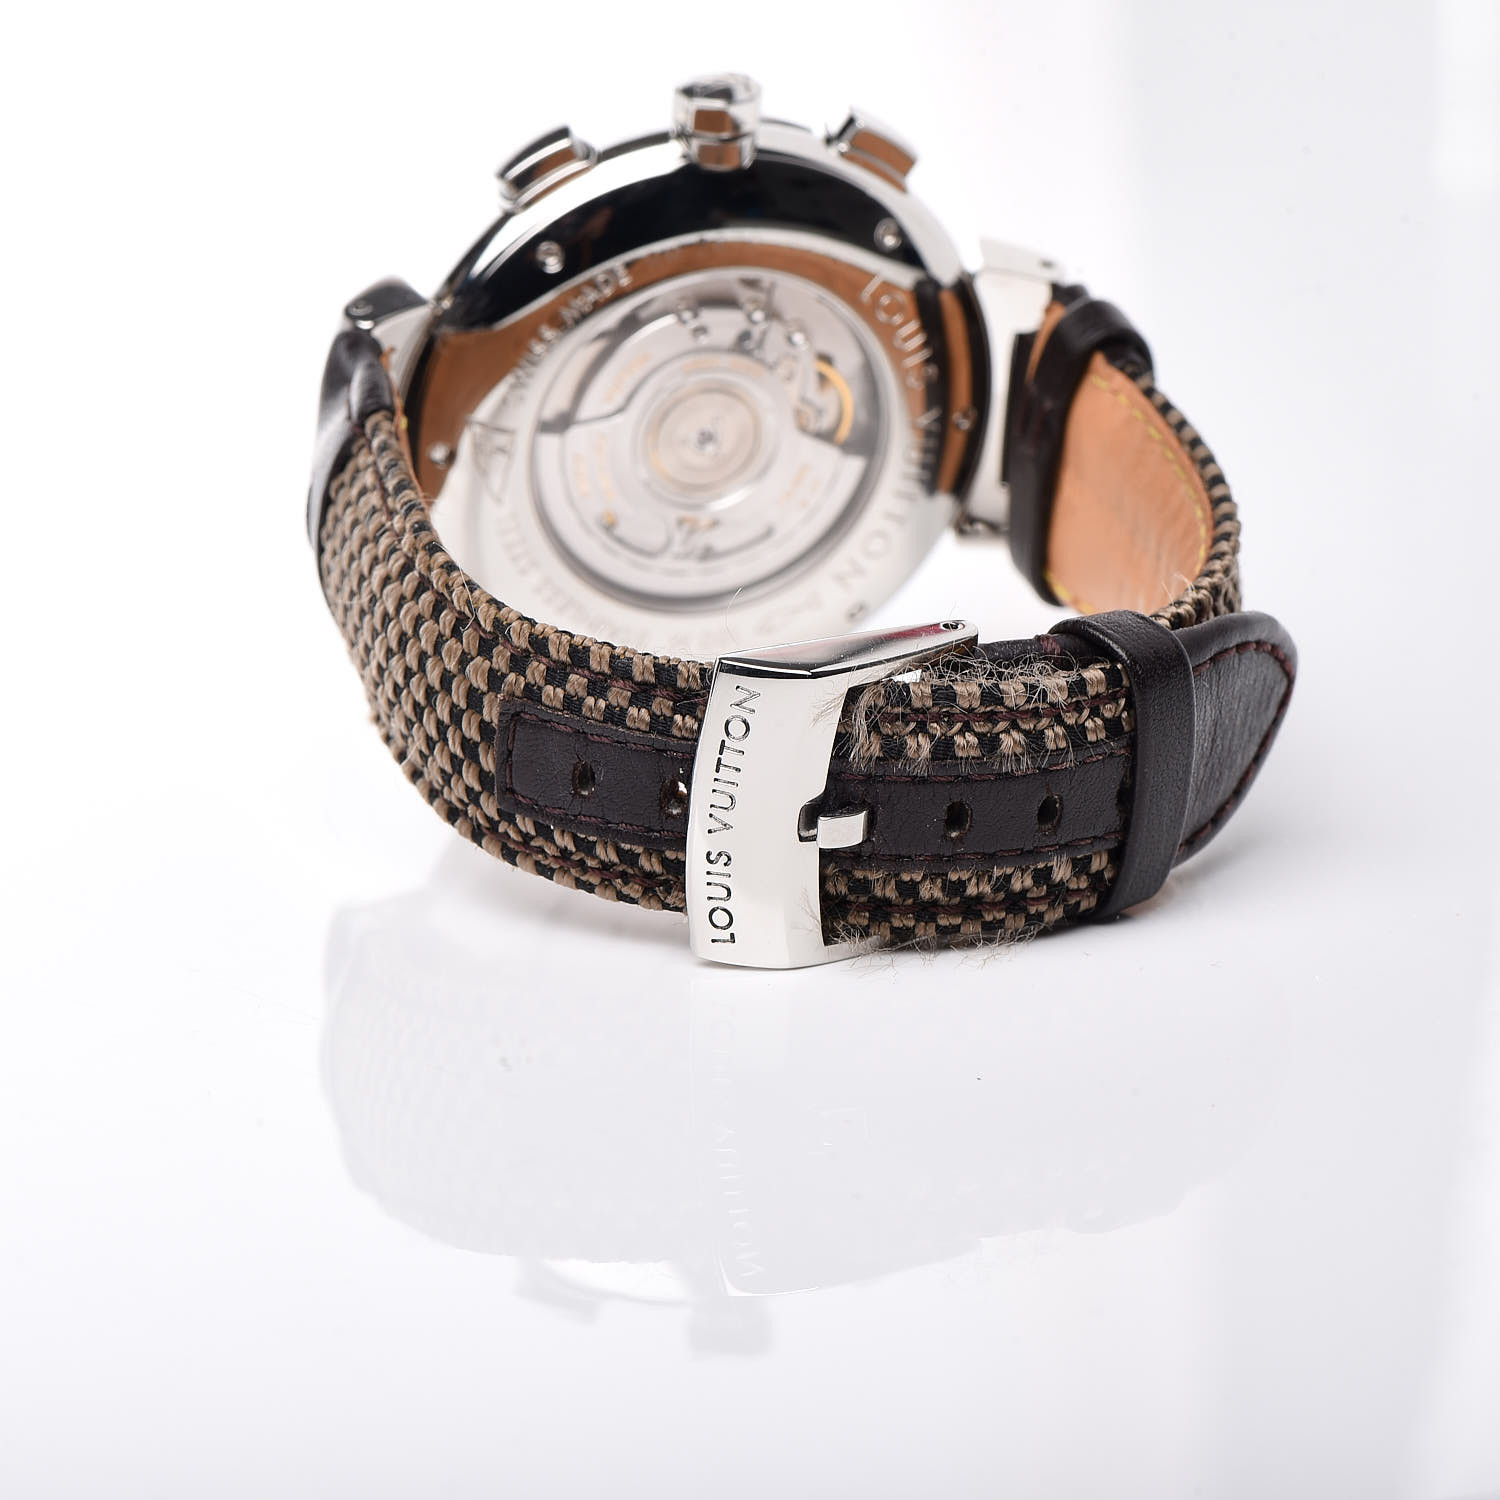 Louis Vuitton Stainless Steel 44mm Tambour Cup Regate Chronograph Automatic Watch Fashionphile